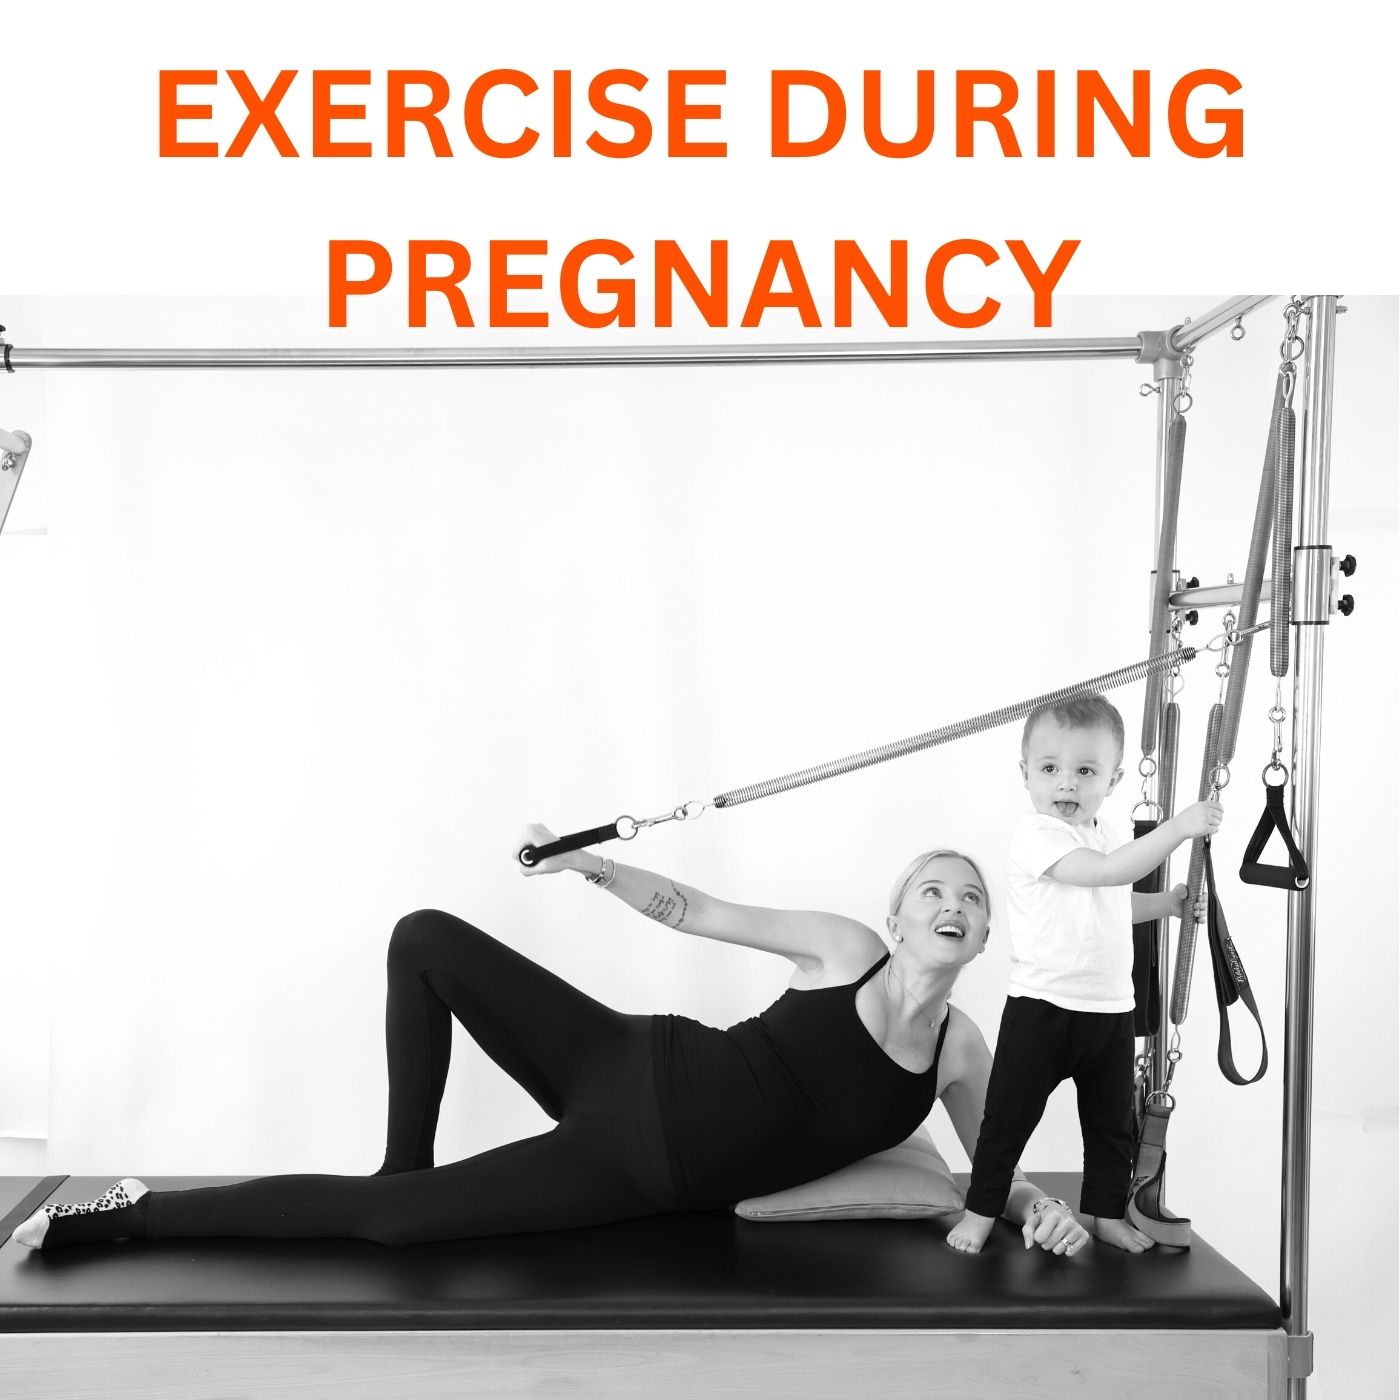 Pregnant woman exercising on the Pilates Cadillac doing side lying arm springs. Her 2 year old son is close by holding an arm spring handle